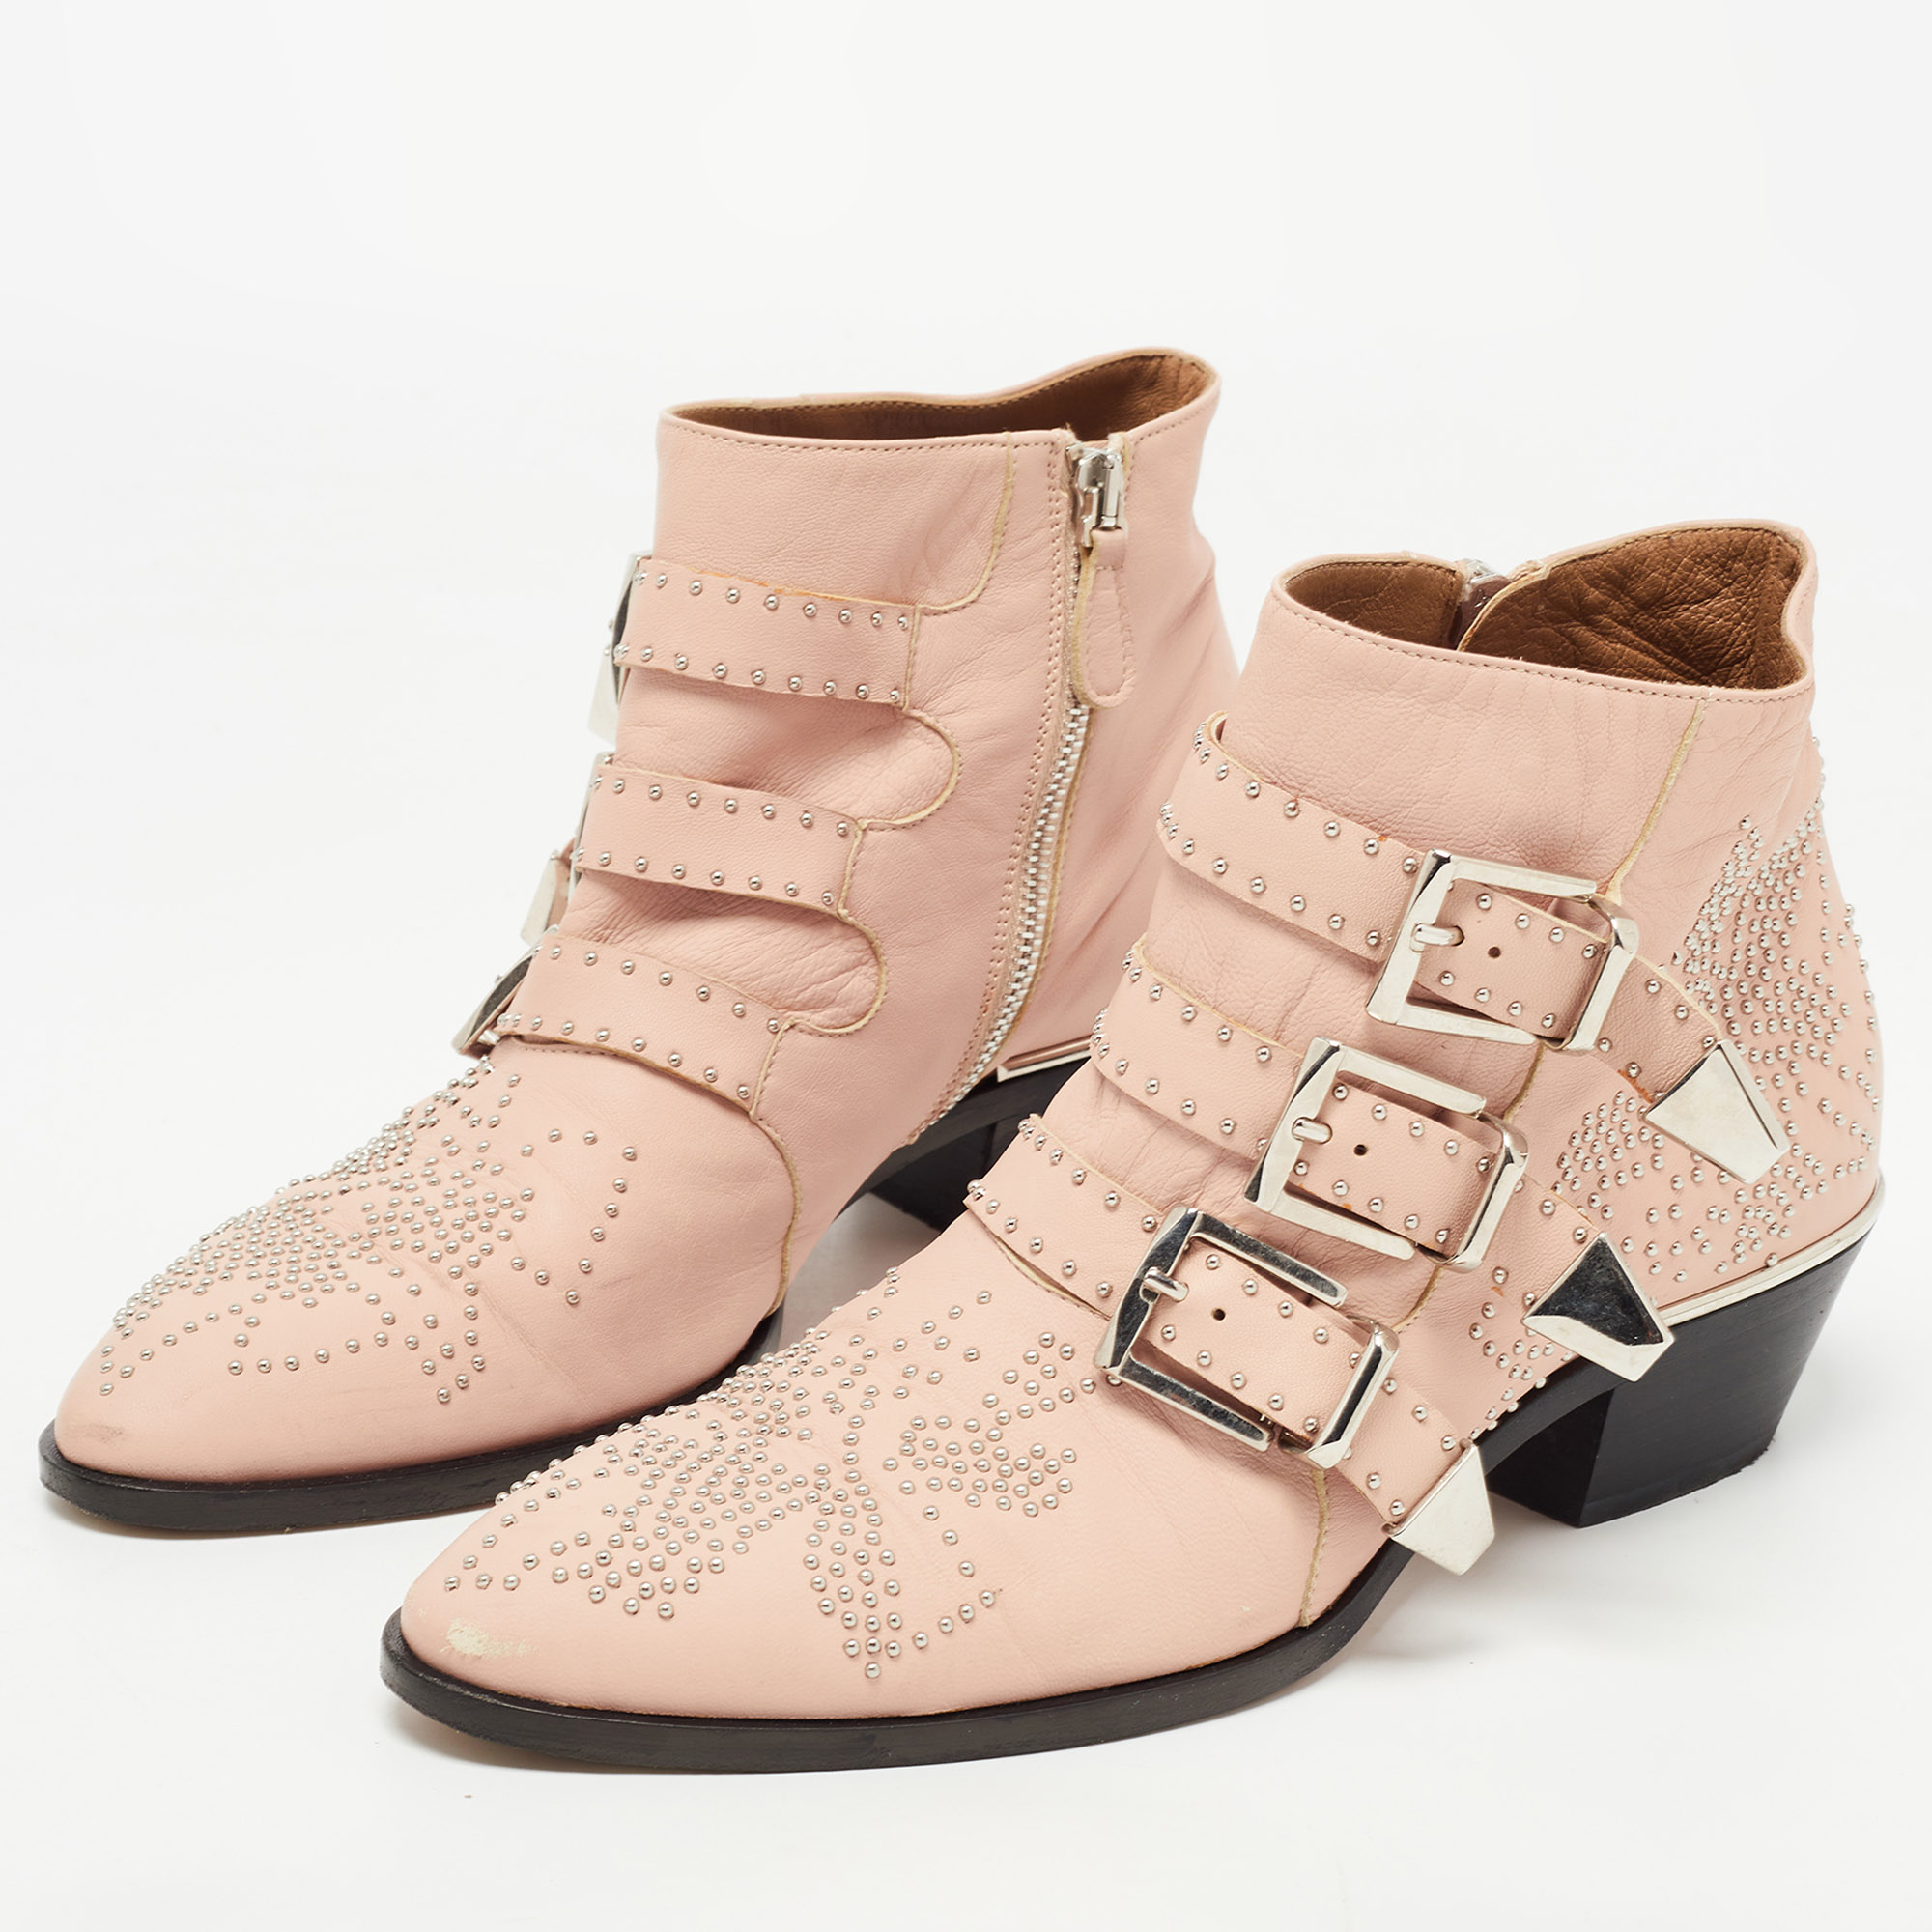 

Chloe Pink Studded Leather Susanna Ankle Boots Size